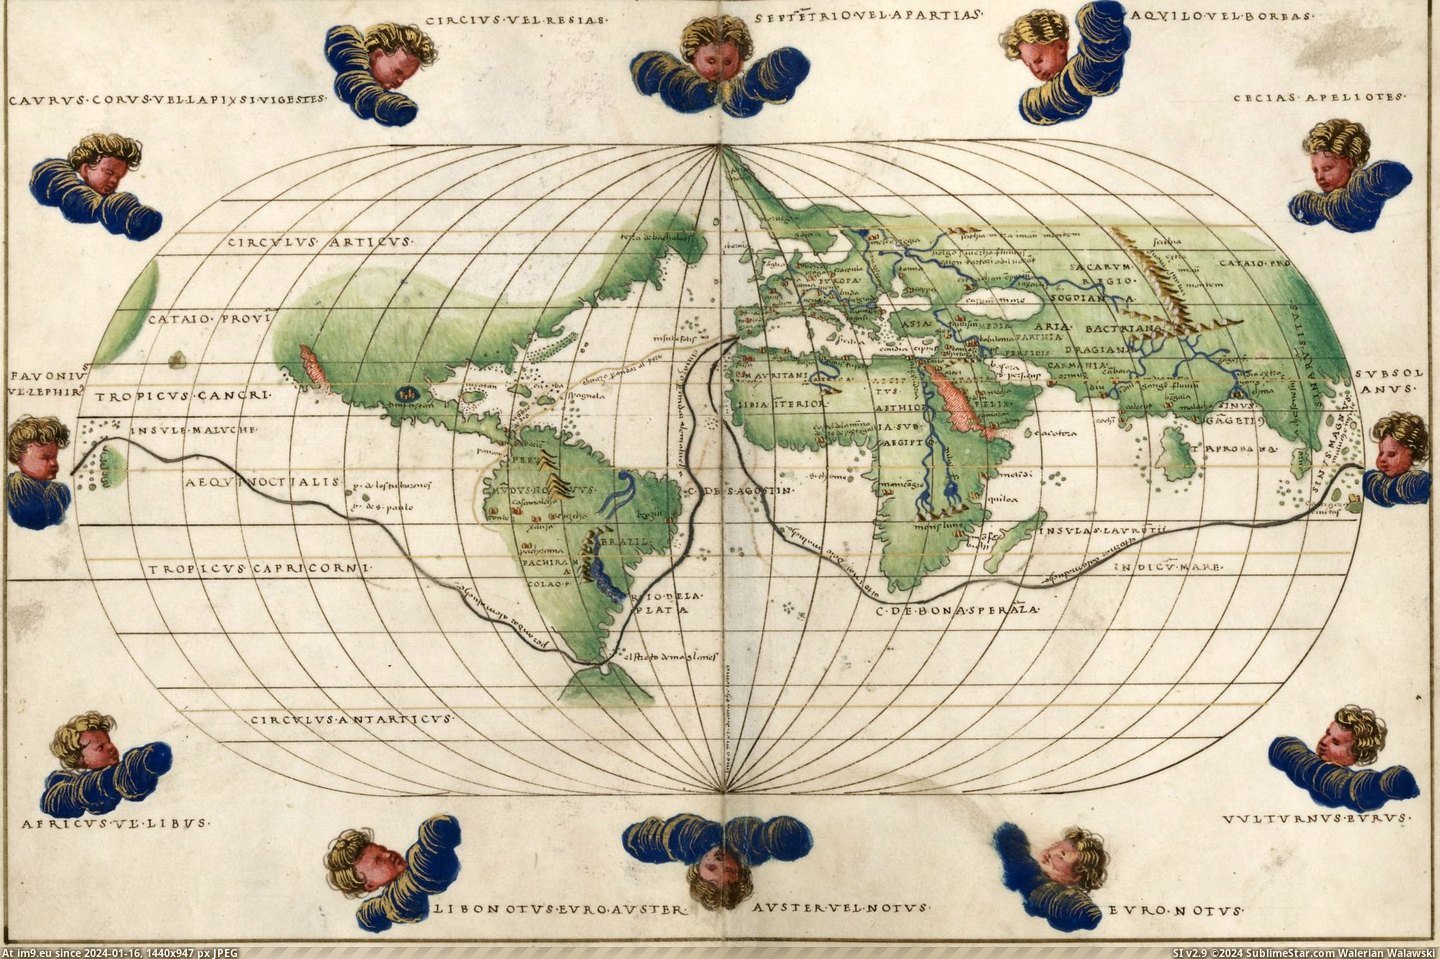 #Old #Earth #Atlas #Map [Mapporn] Magellan's Circumnavigation of the Earth, from the Portolan Atlas by Battista Agnese, c. 1544. [2235x1482] Pic. (Bild von album My r/MAPS favs))